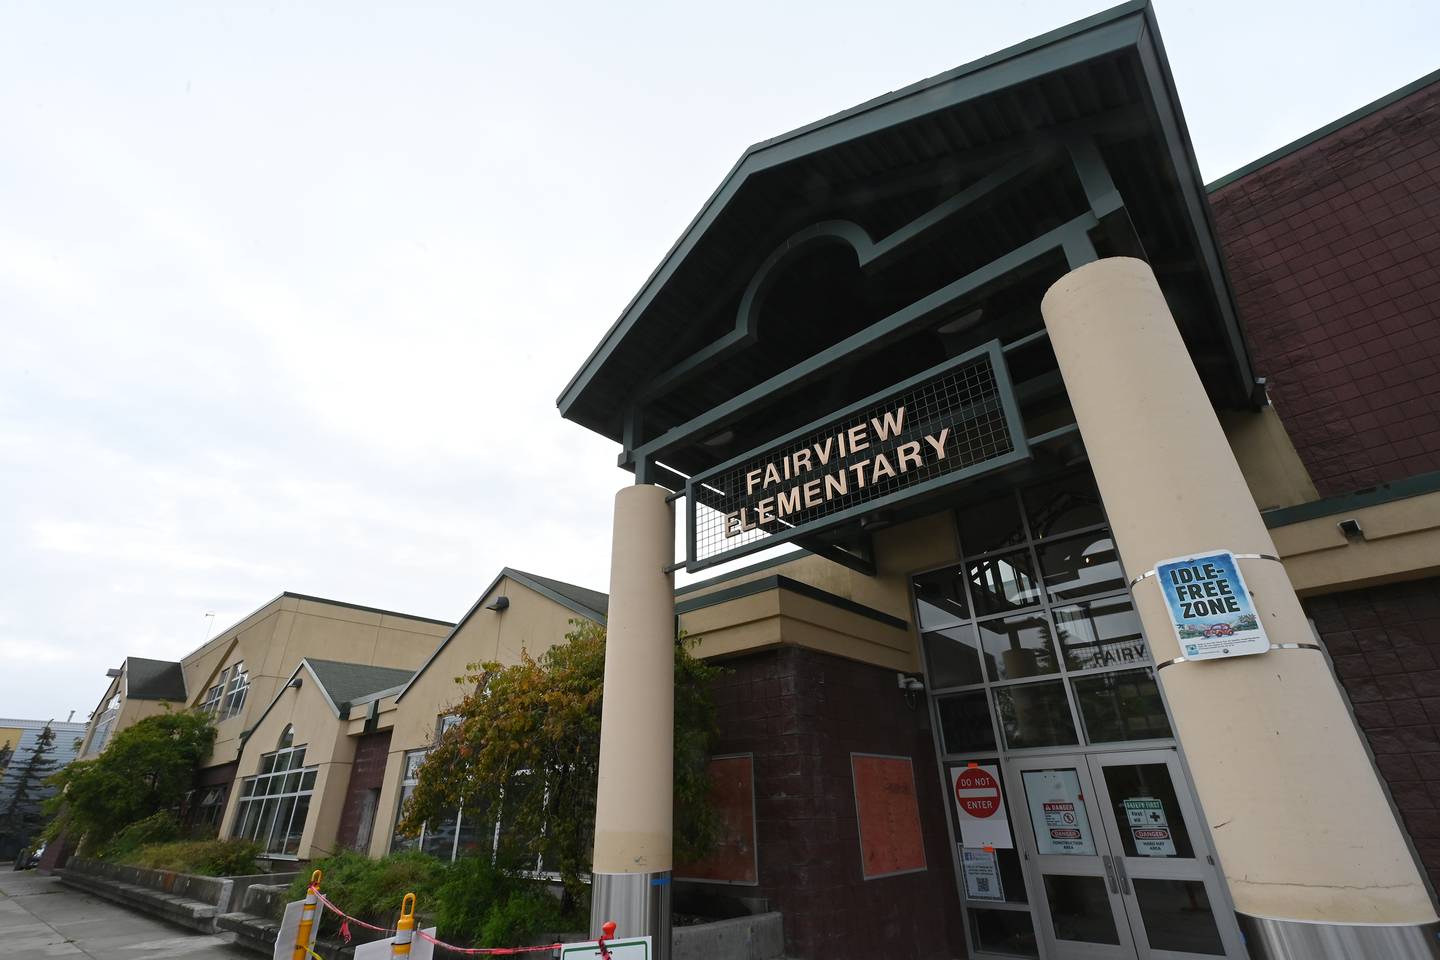 Anchorage School Board approves renaming Fairview Elementary after